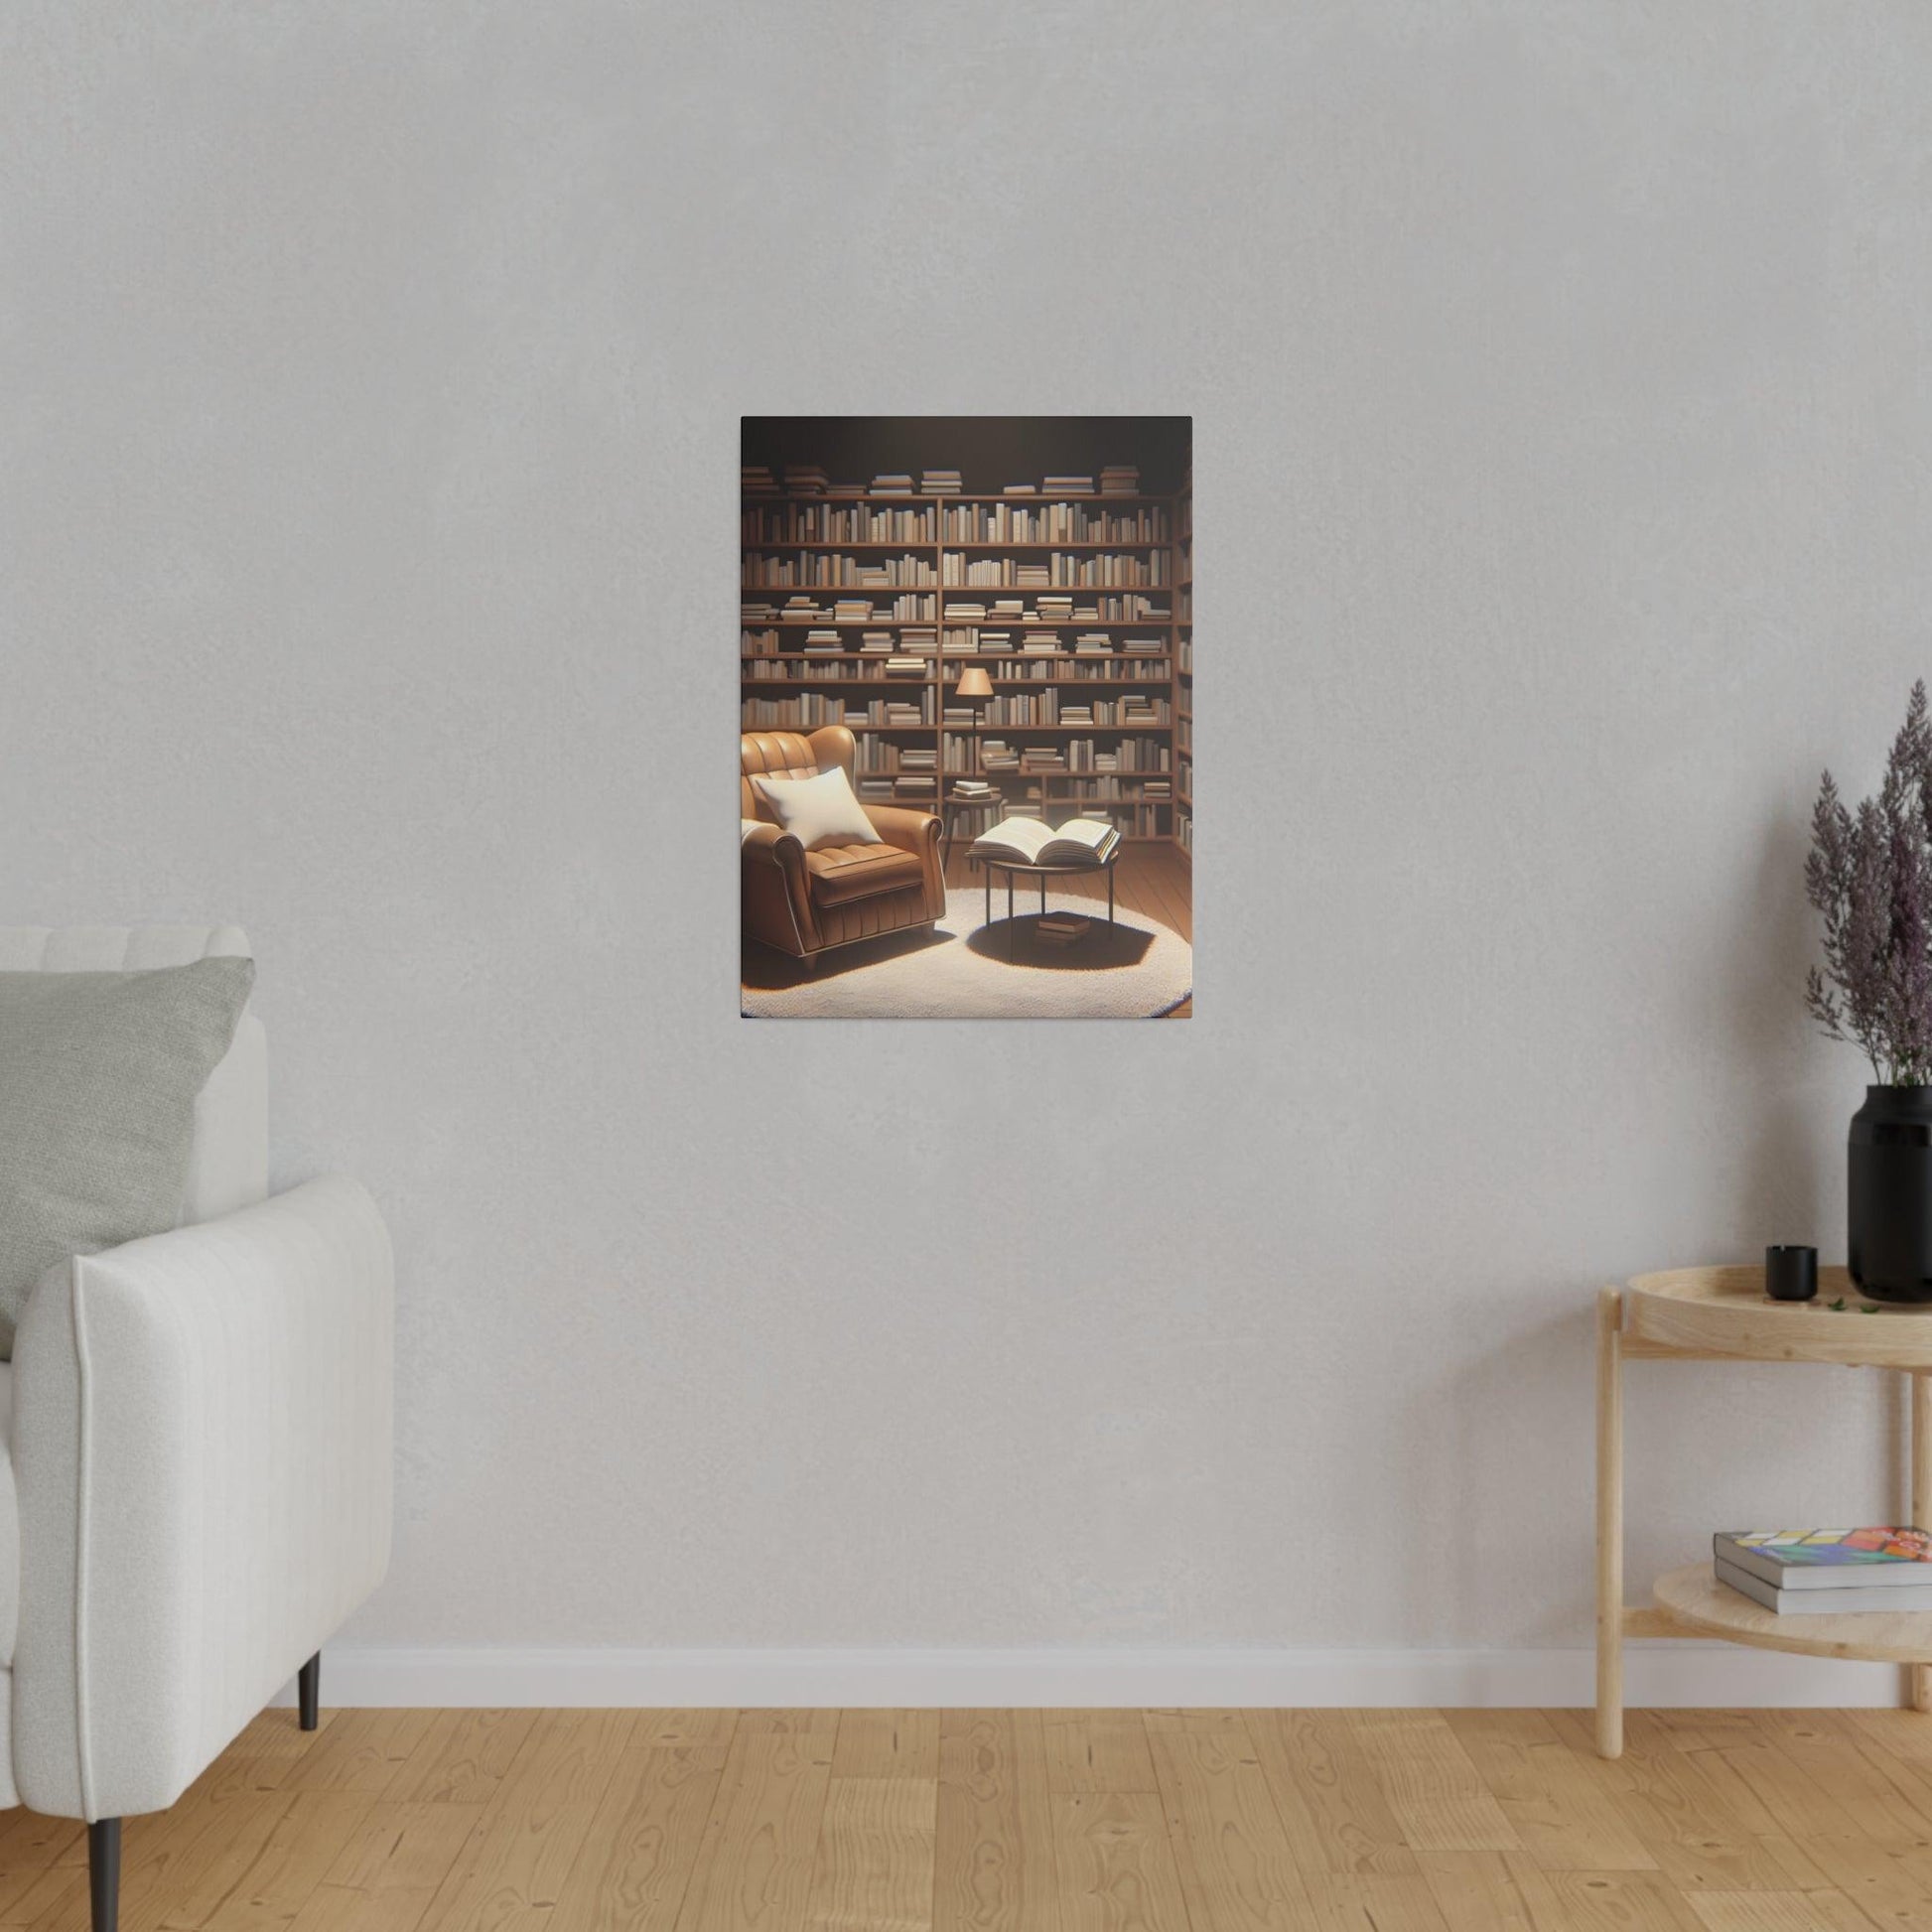 "BookScape Inspirations: A Canvas Wall Art Odyssey" - The Alice Gallery